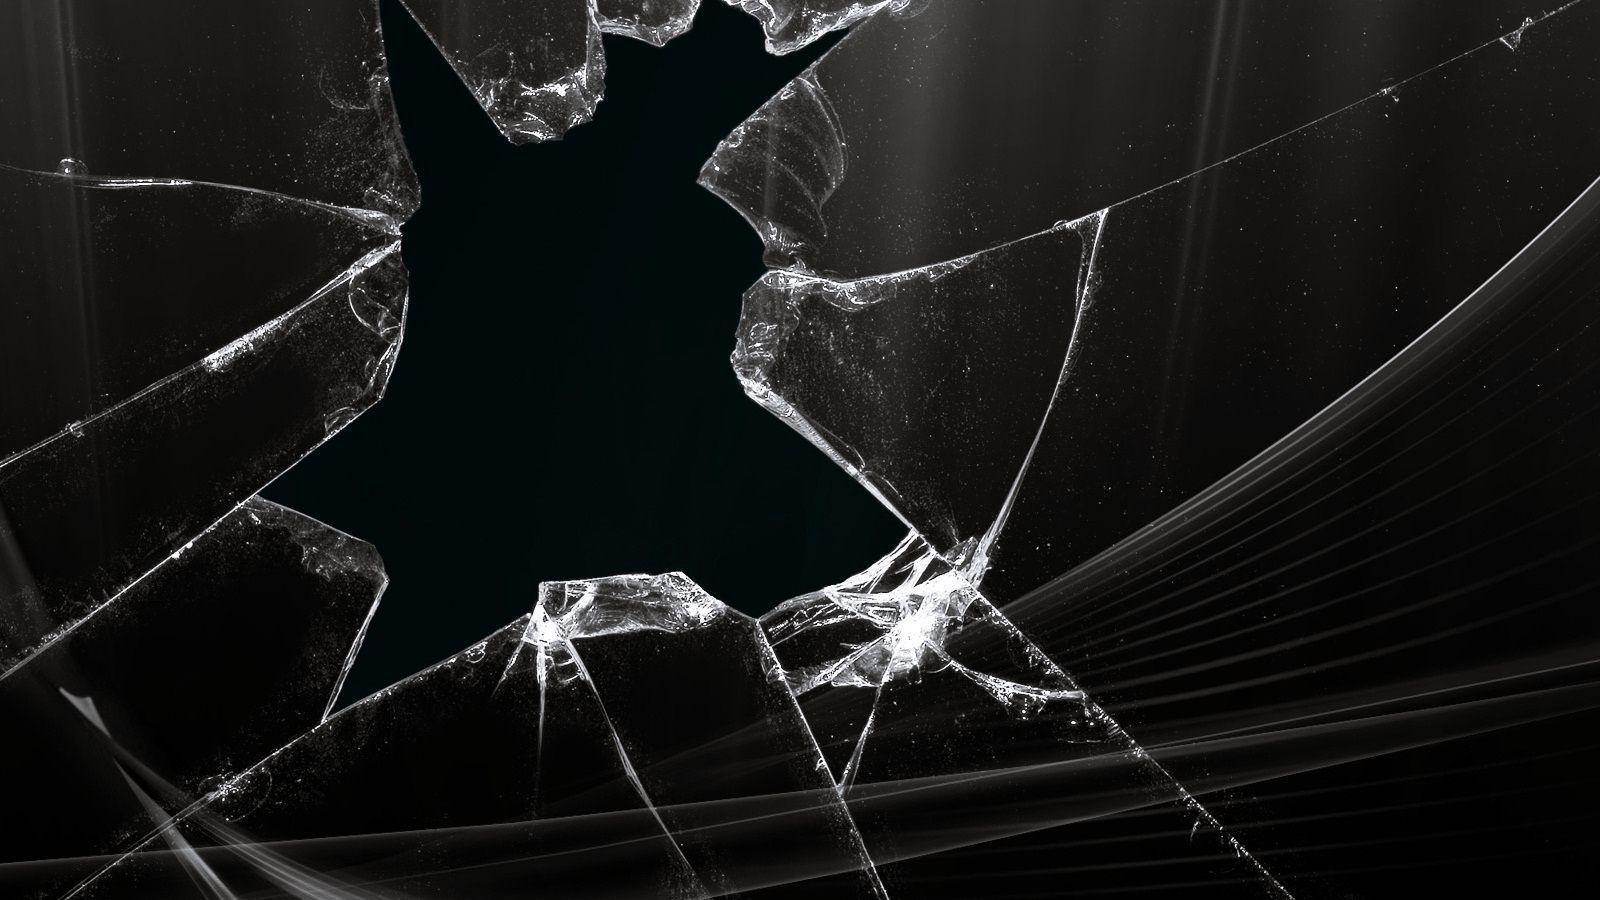 Stunning Cracked Screen Windows Hd Wallpapers 1920x1200PX ~ Crack